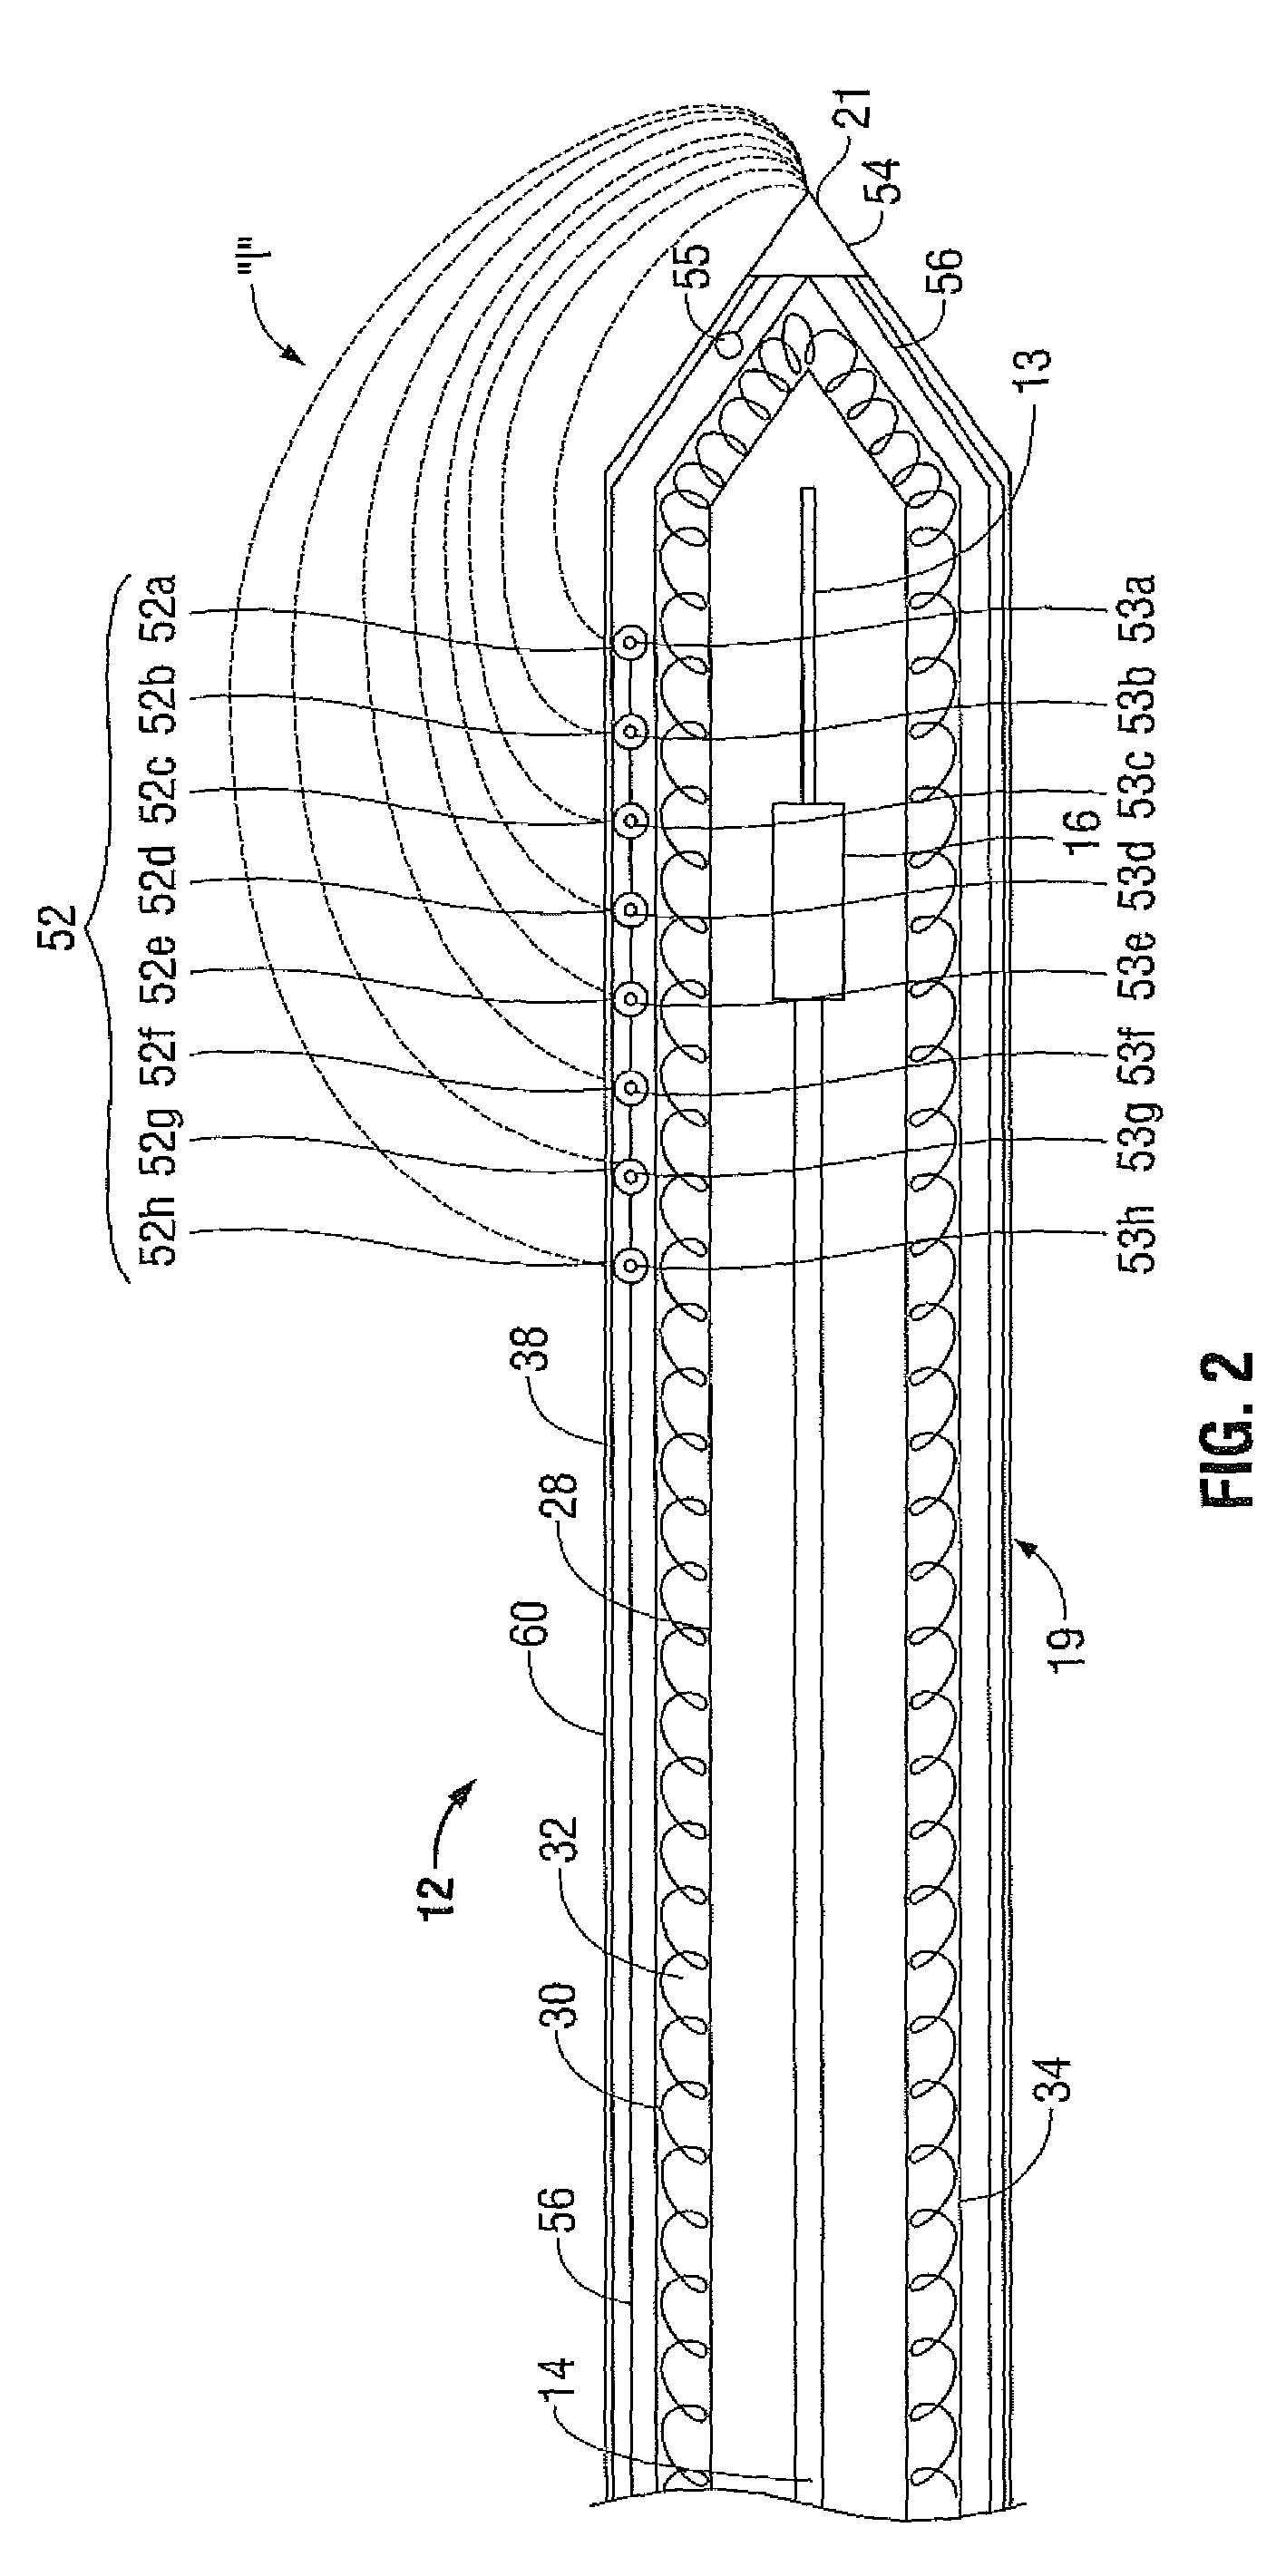 System for monitoring ablation size